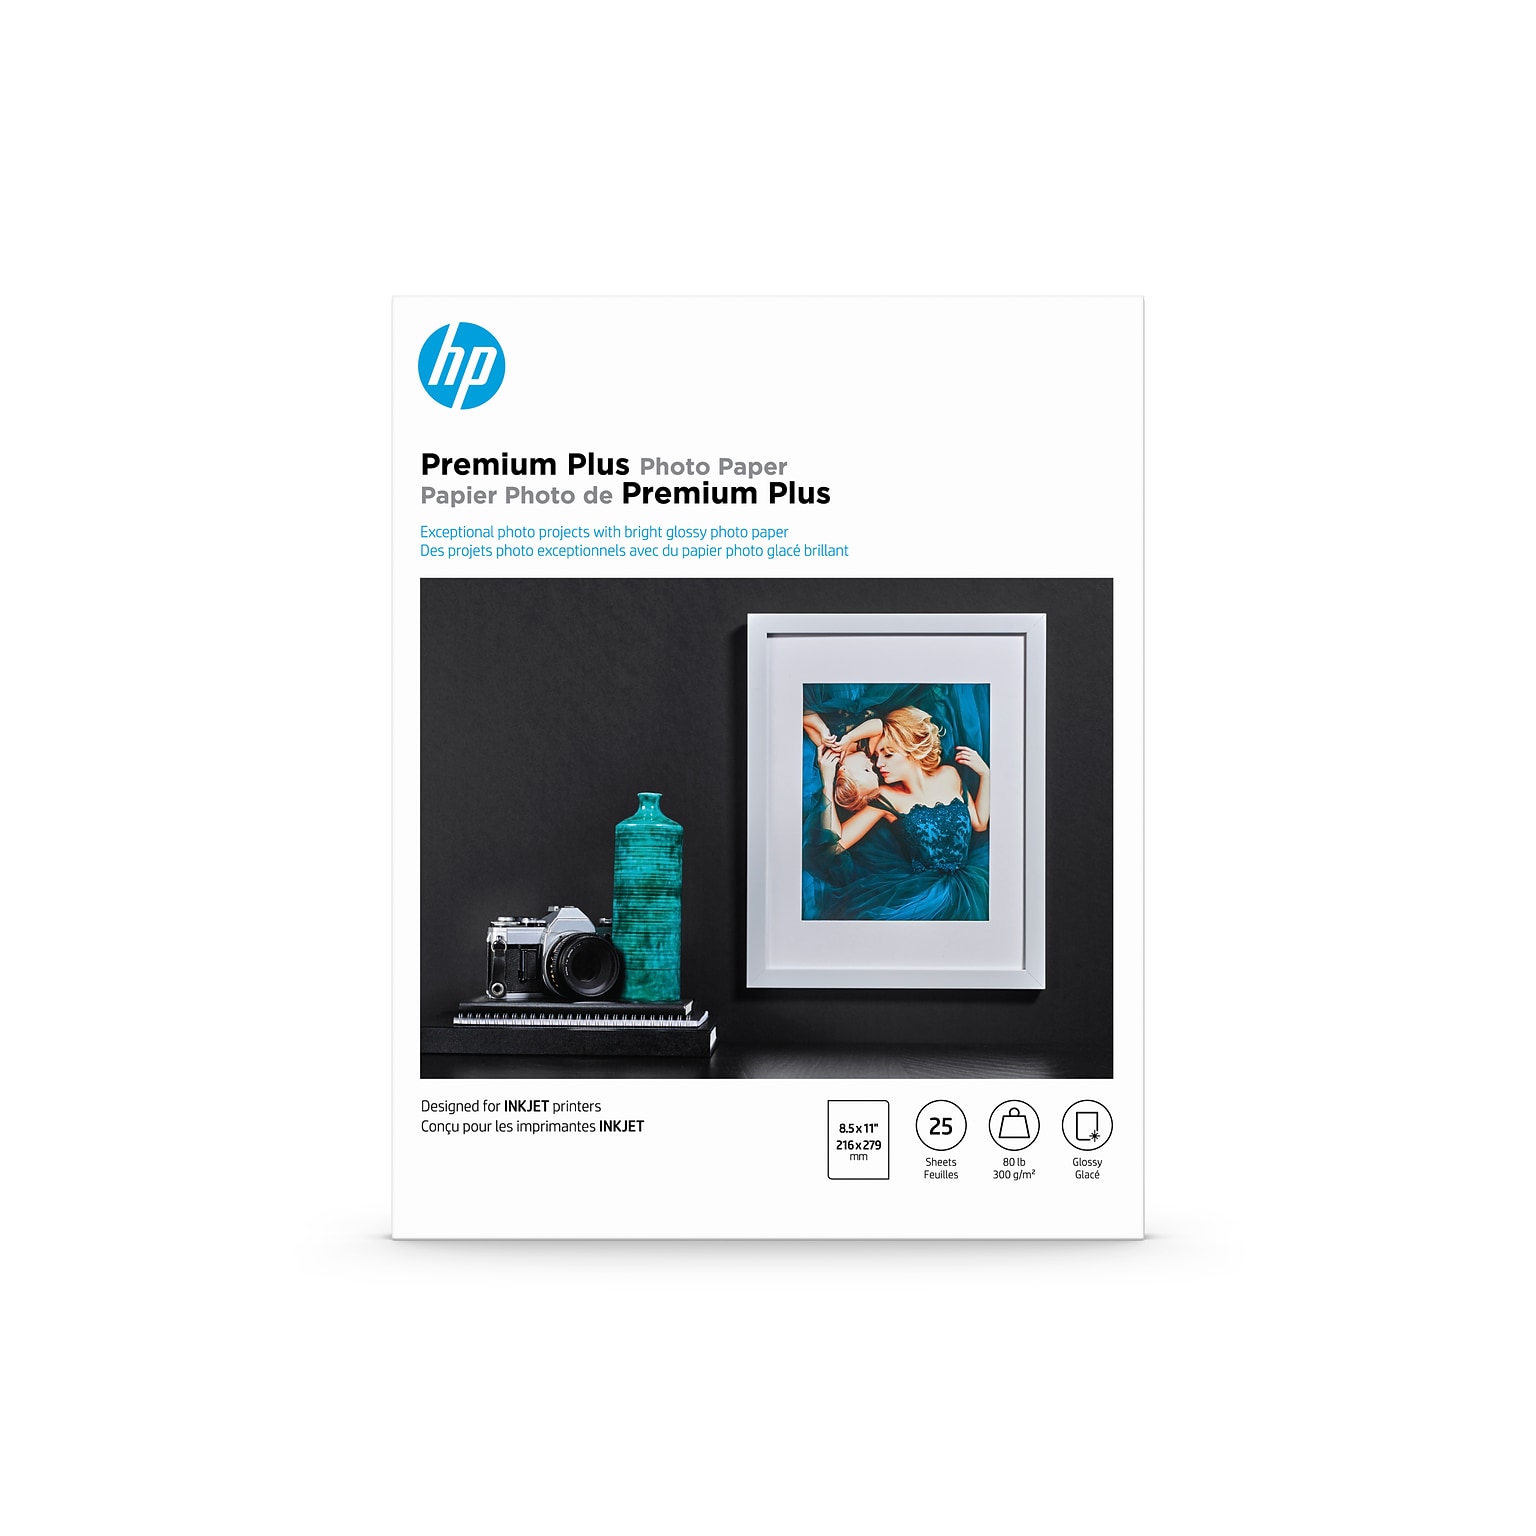 HP Premium Plus Photo Paper, Glossy, 8.5 x 11, 25 Sheets/Pack (CR670A)